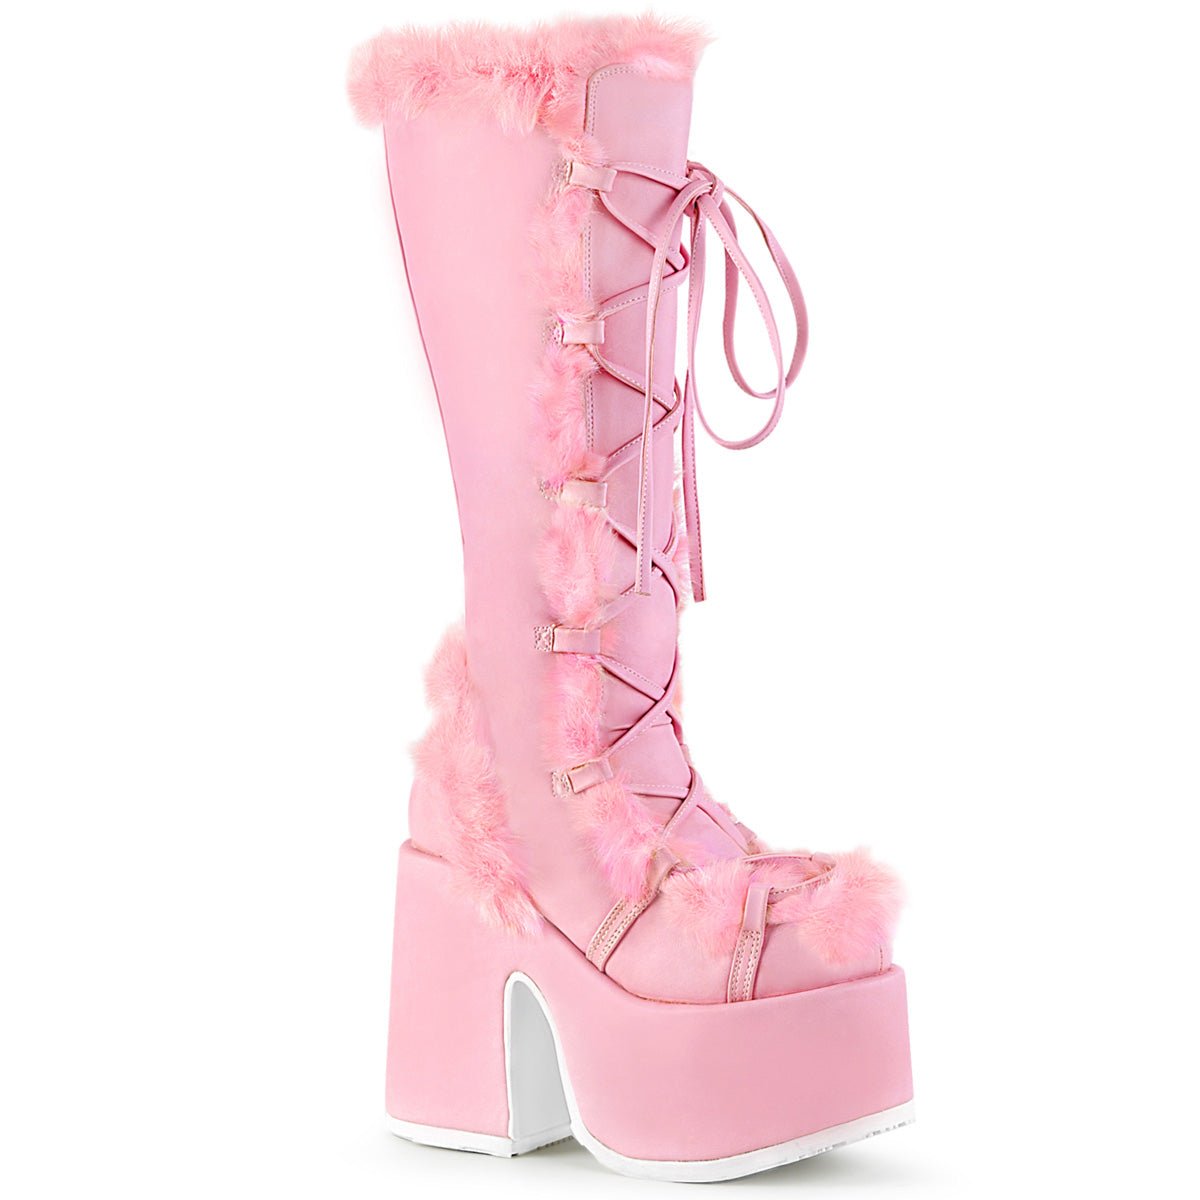 Demonia CAMEL-311 | Pastel Pink Vegan Leather Knee High Boots | Too Fast | Reviews on Judge.me